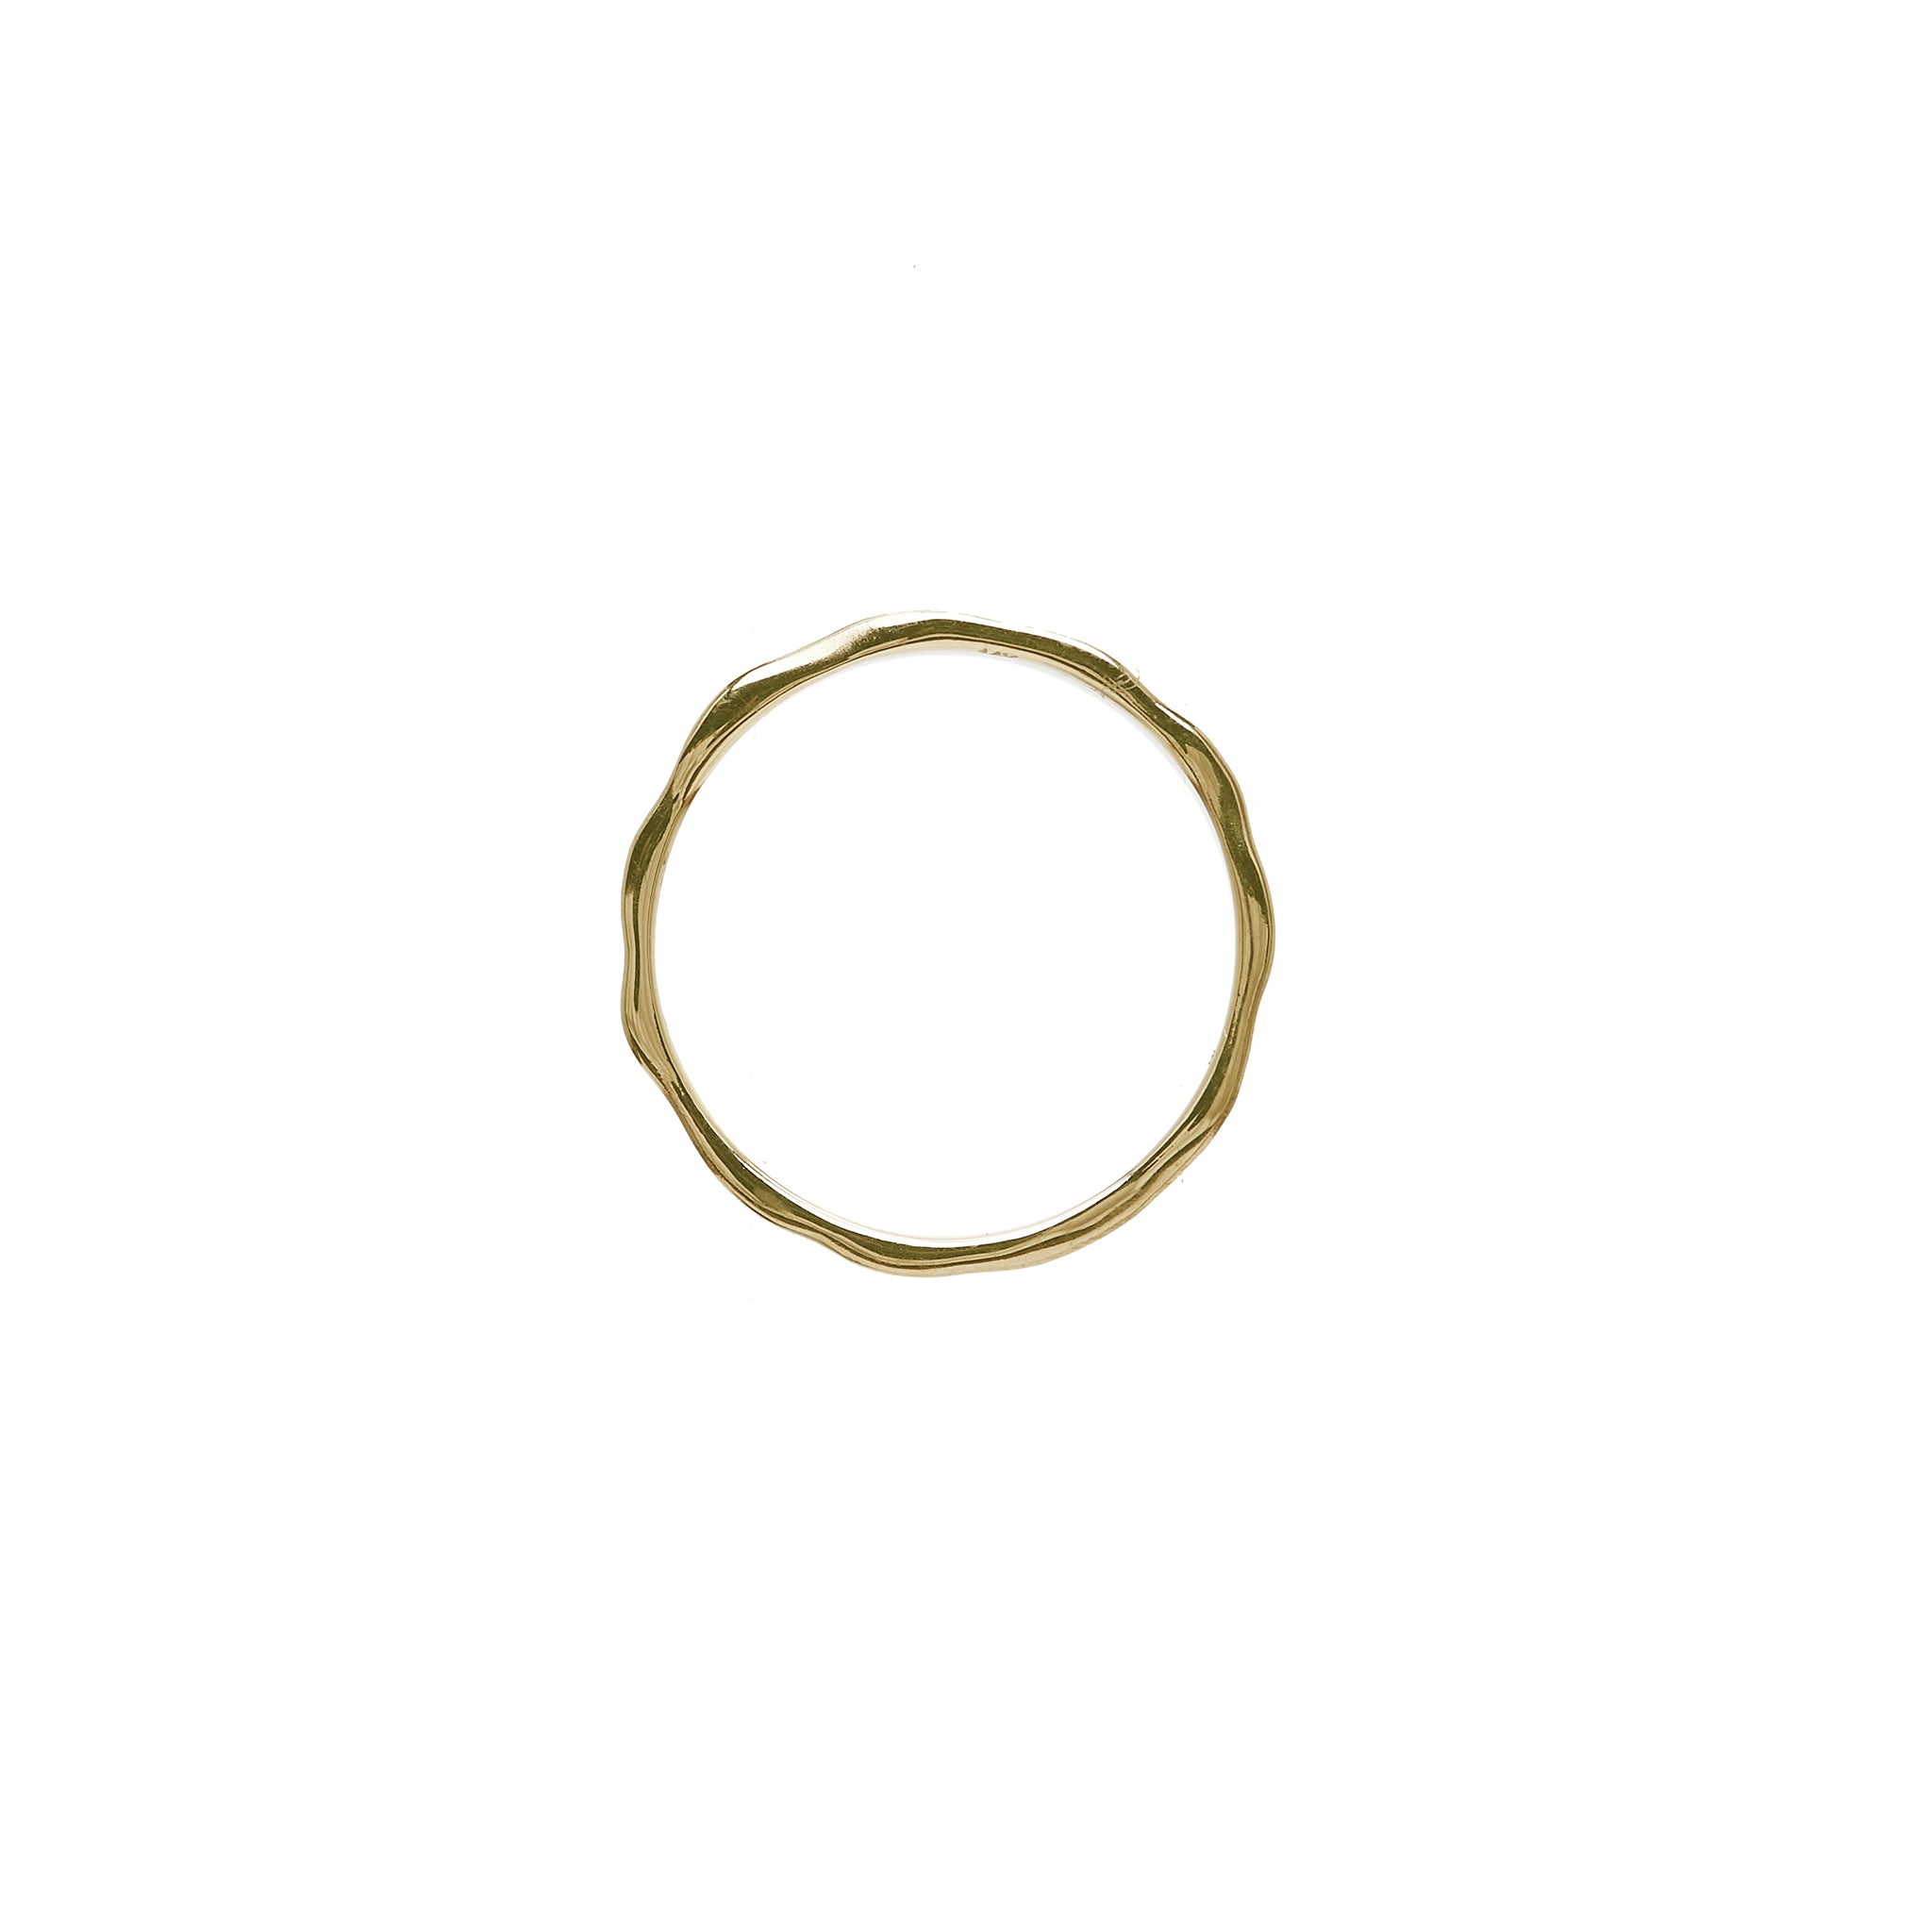 The Straits Finery minimalist stacking ring in 14k solid gold with organic shape